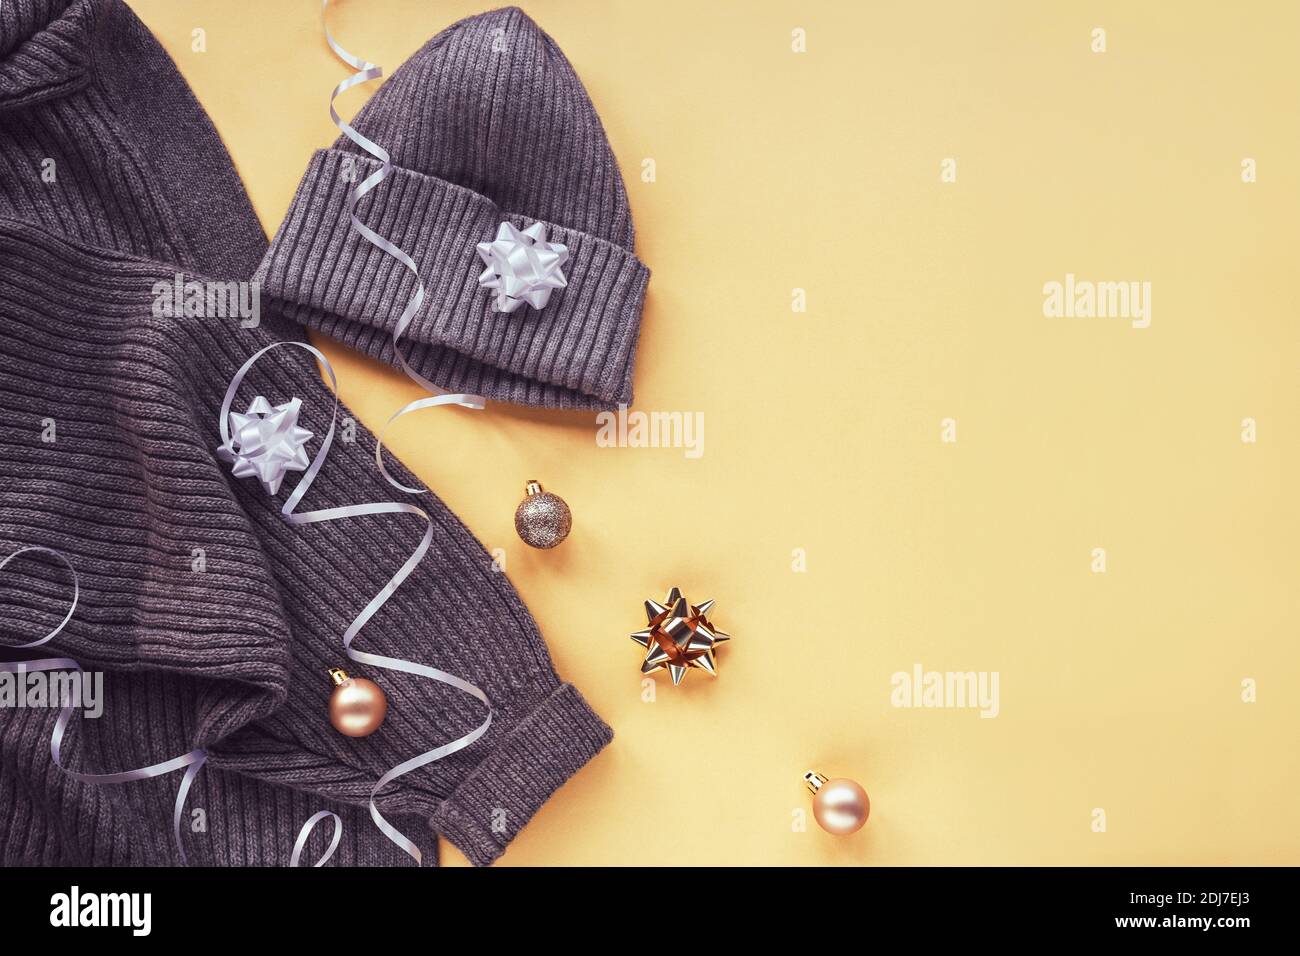 Gray cardigan sweater and cap on yellow background with baubles and tinsel. Winter holidays concept. Top view, flat lay. Stock Photo